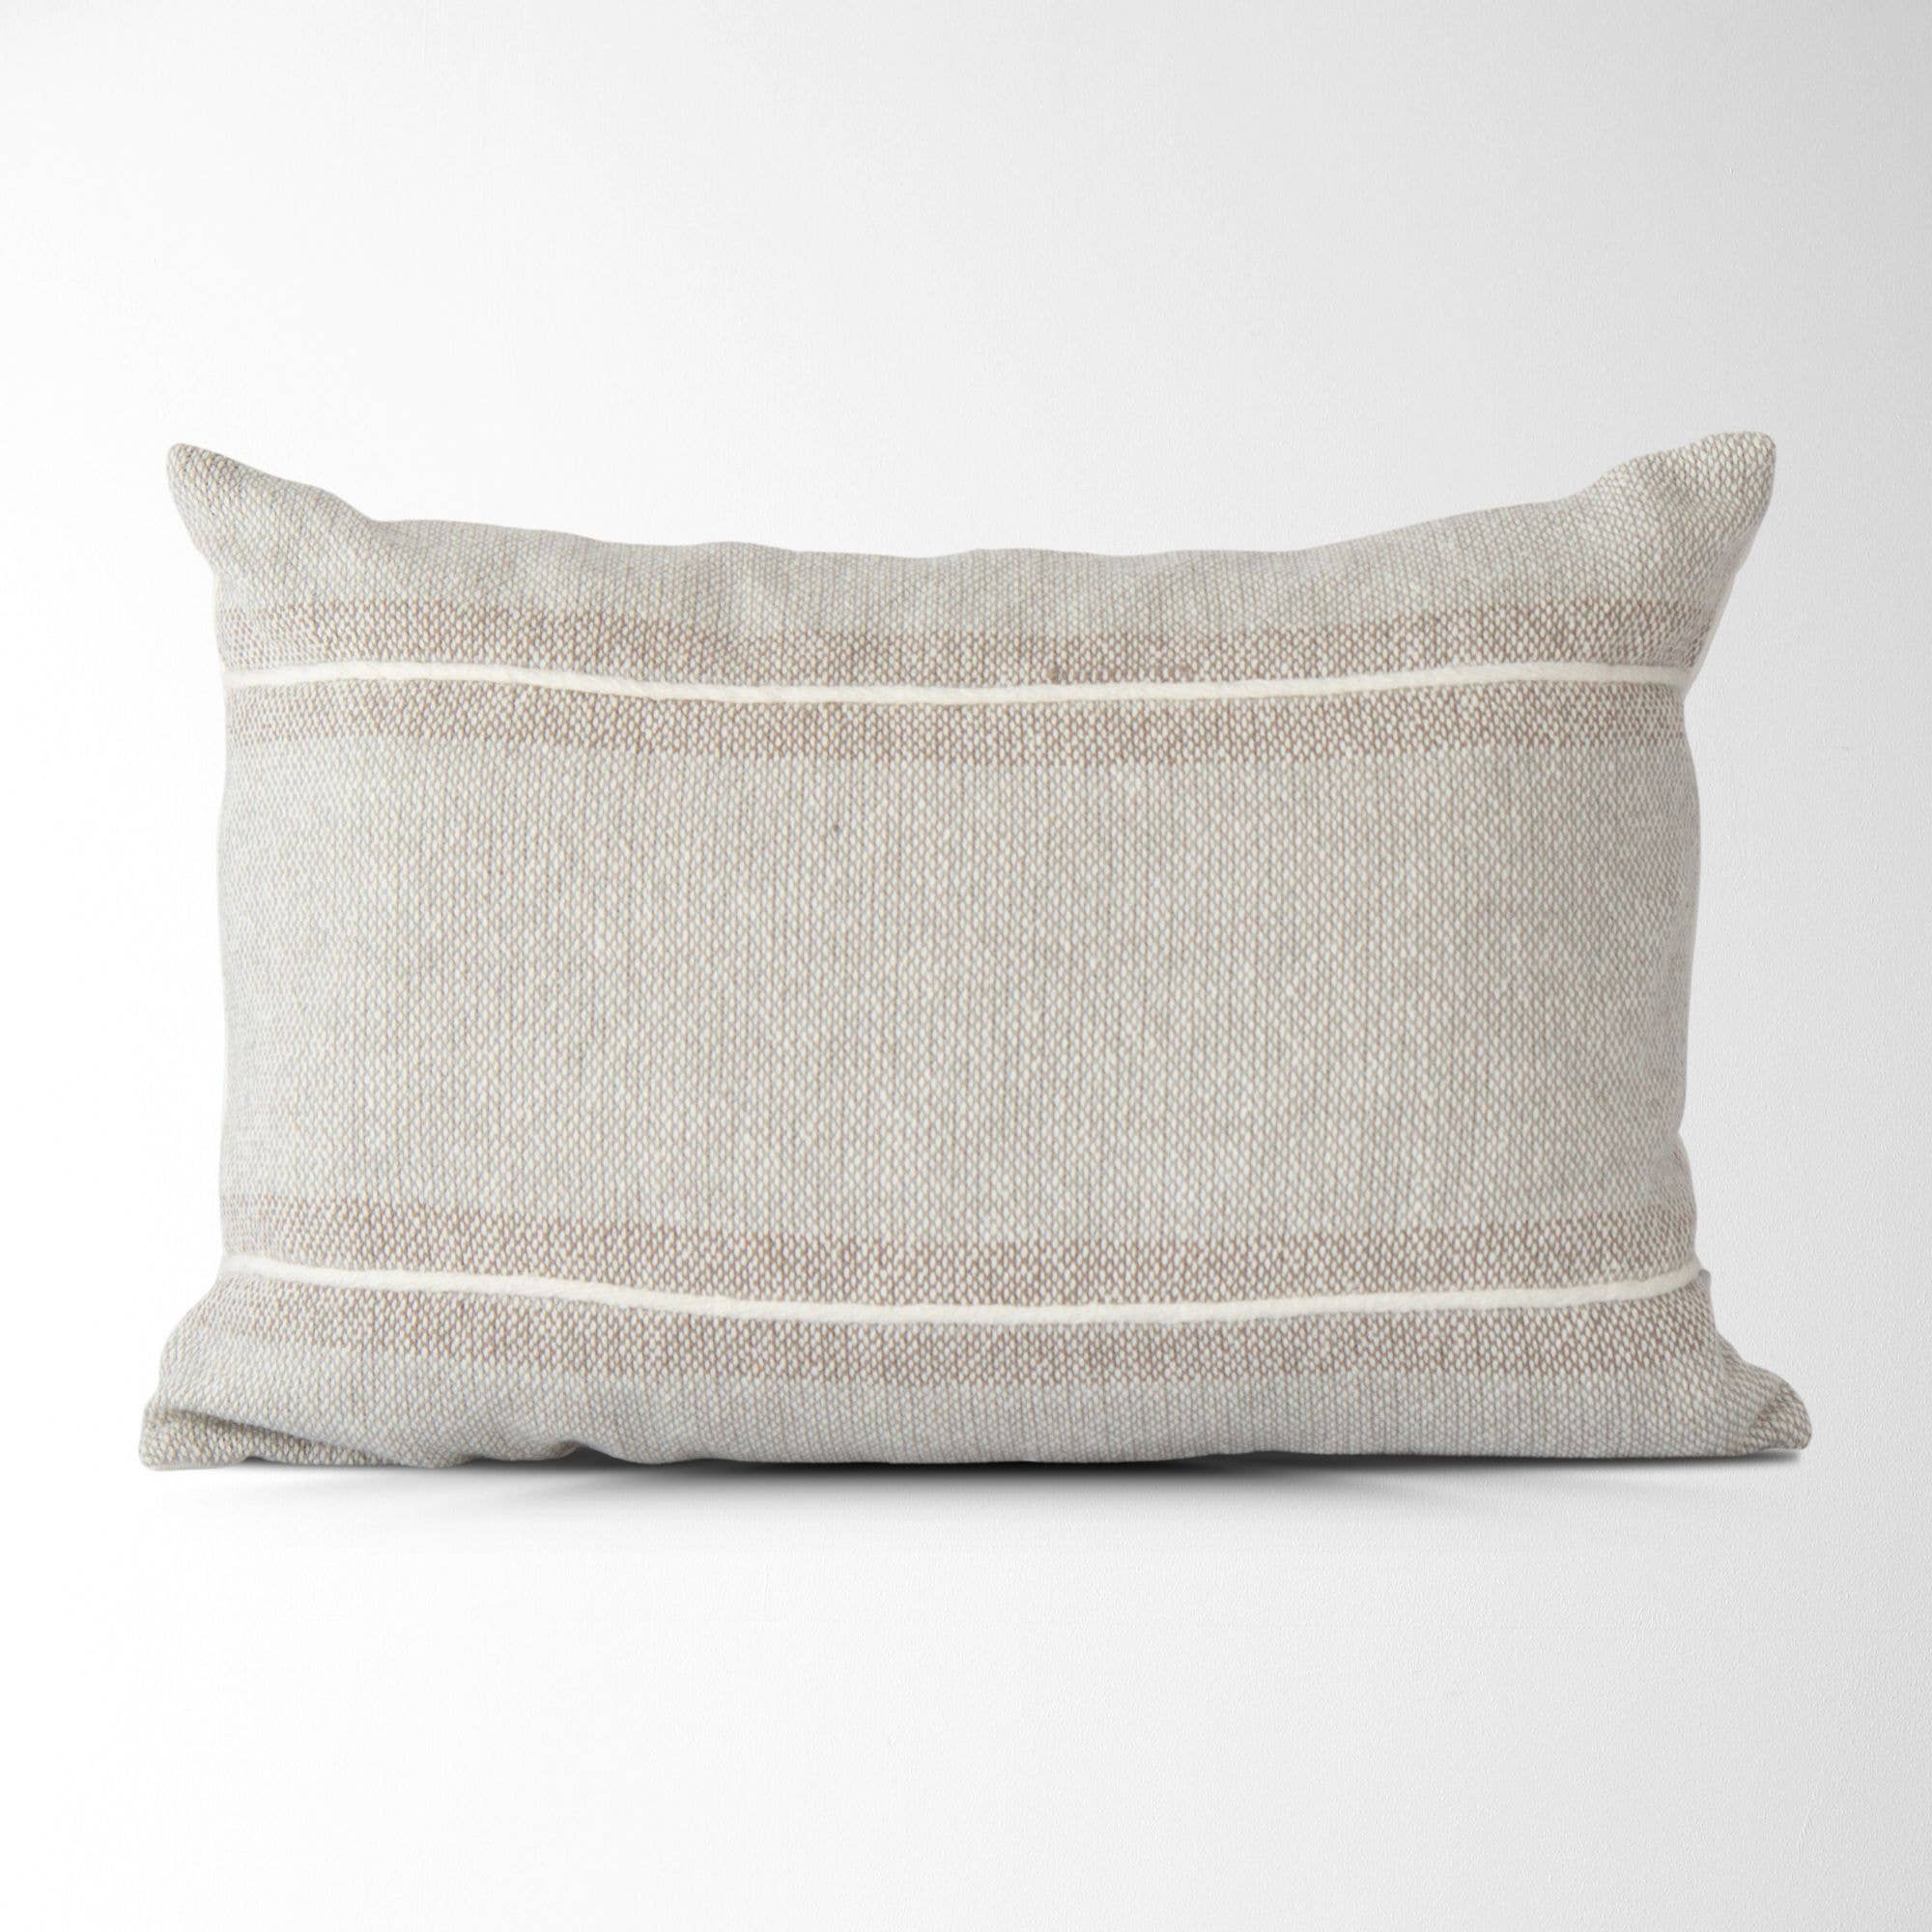 Harlow Striped Textured Pillow Cover - Gray